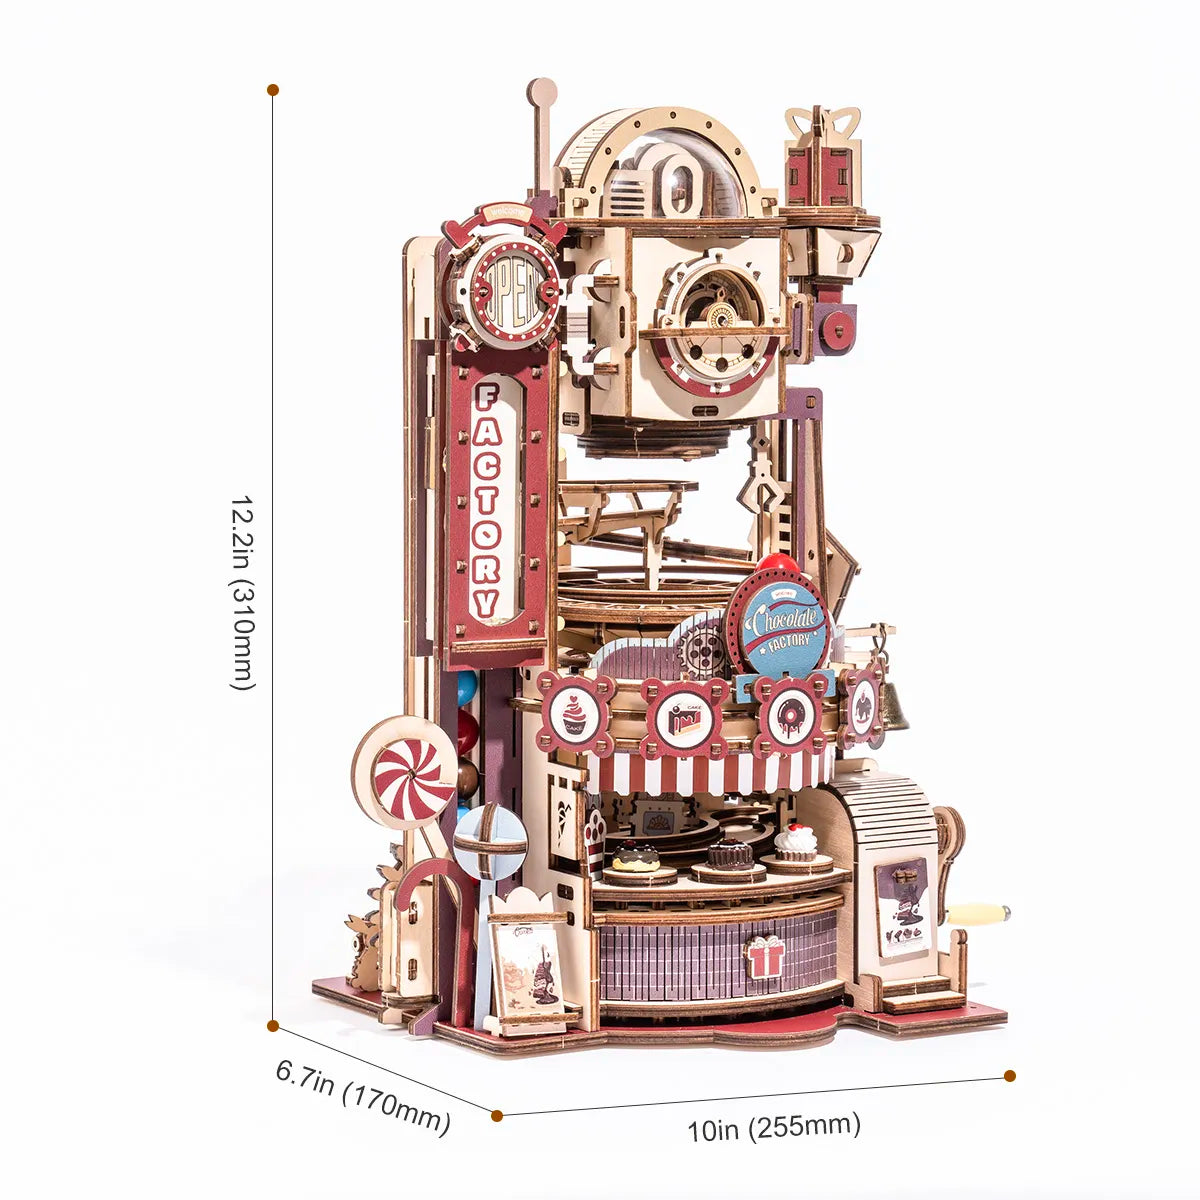 3D Wooden Puzzle 420pcs DIY Chocolate Factory Assembly Marble Run Toy Gift for Children, Teens, and Adults